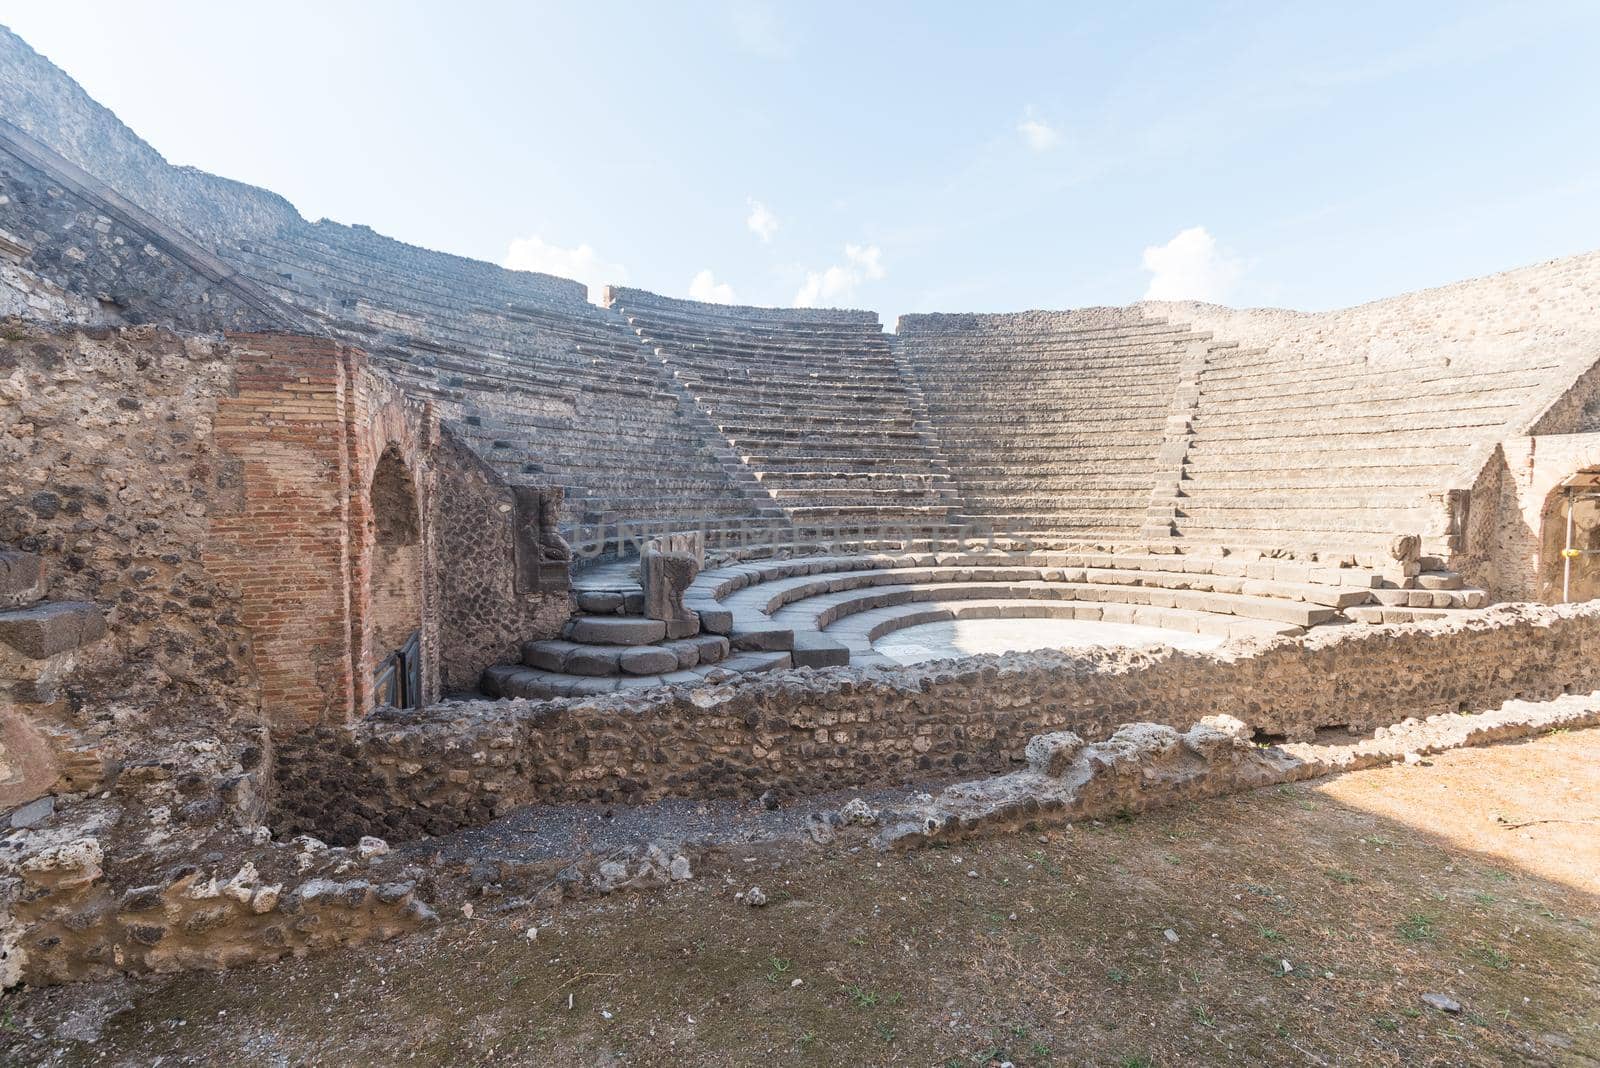 View of a theater at the Roman archaeological site of Pompeii, in Italy.